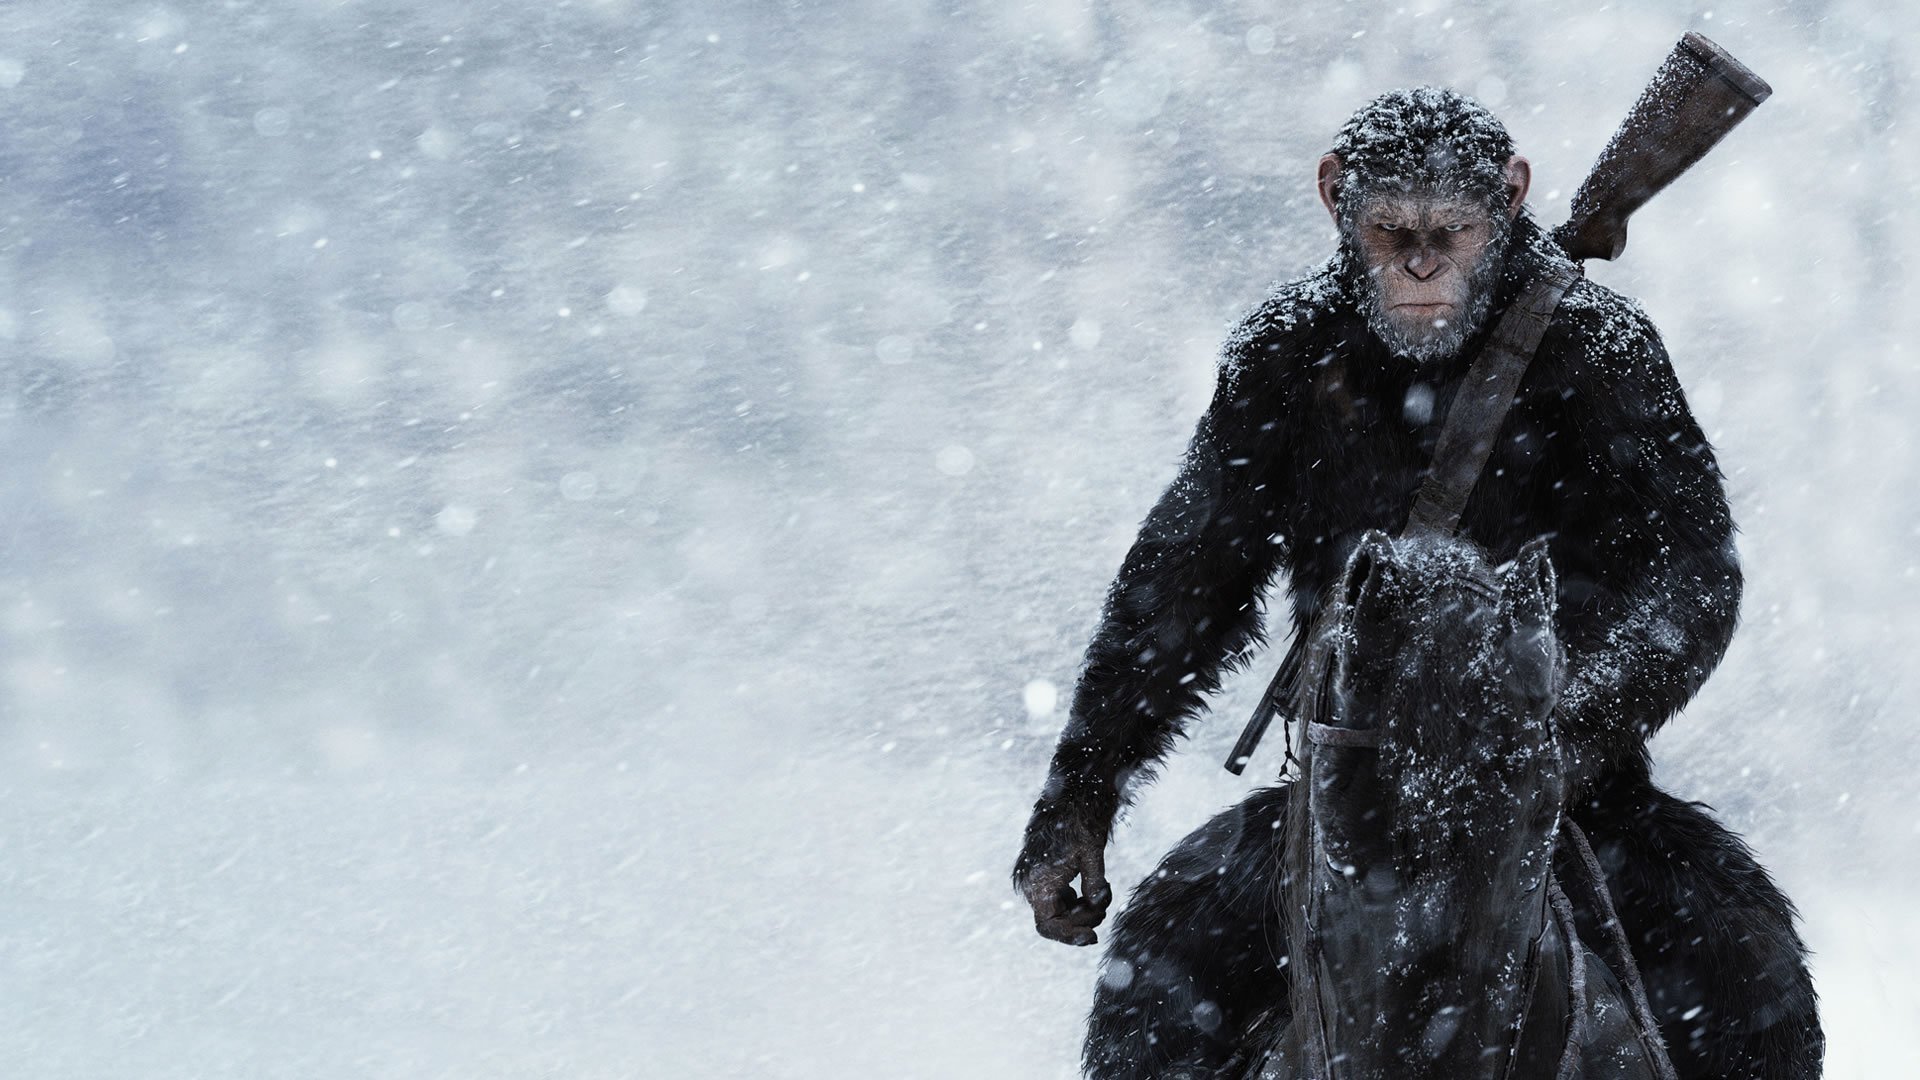 war for the planet of the apes wallpaper,snow,winter storm,blizzard,freezing,playing in the snow